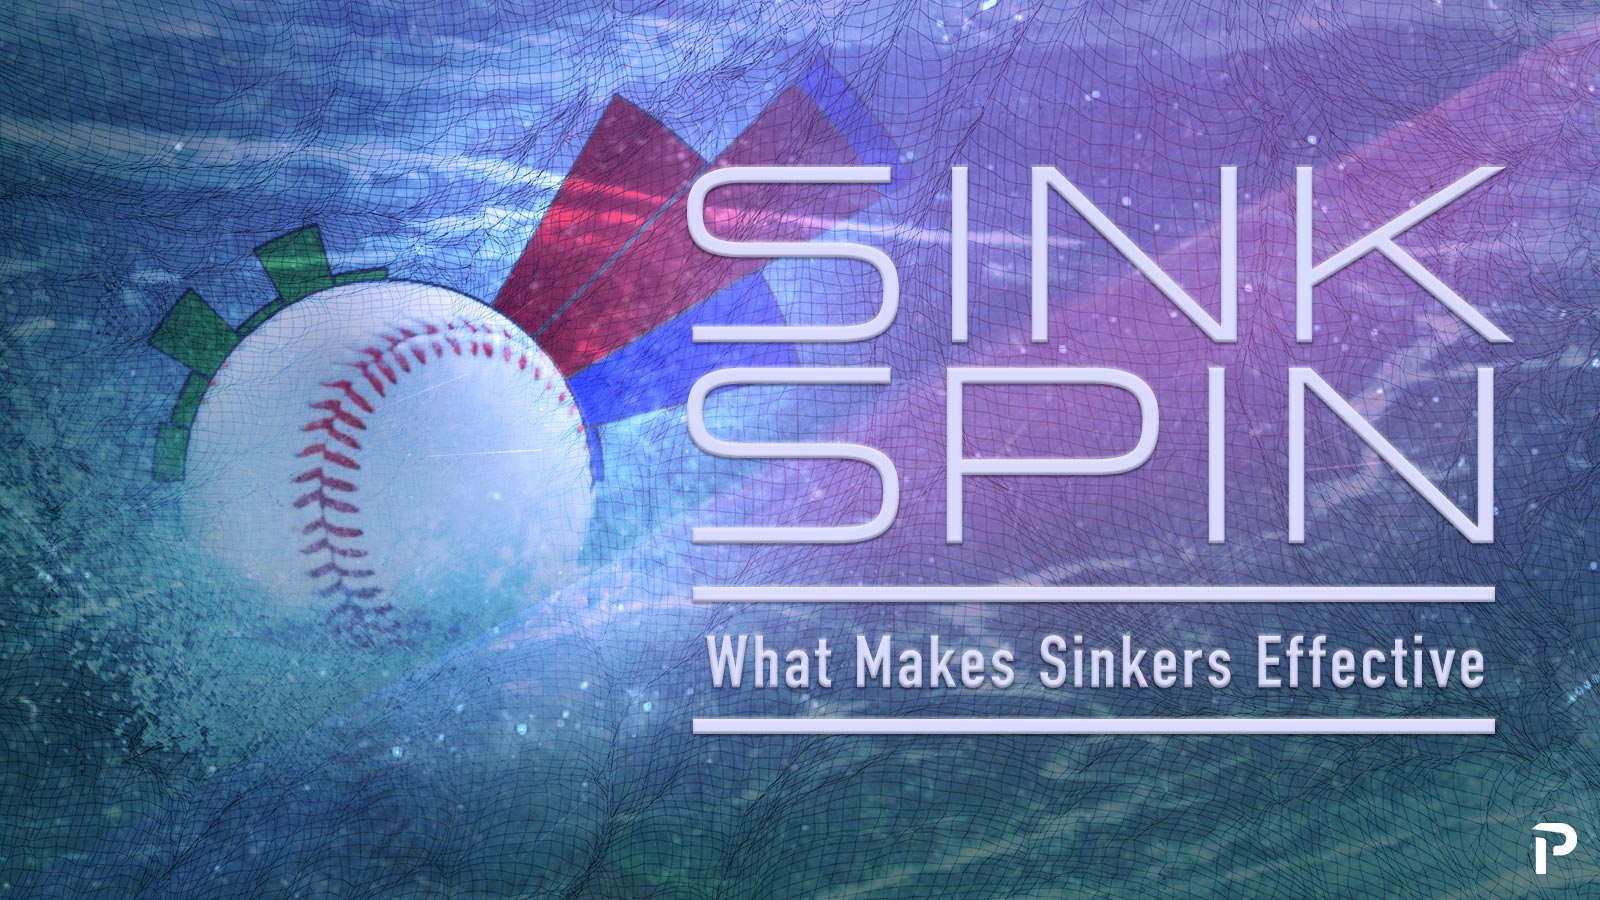 How to Throw a Sinker or Two-Seam Fastball - Driveline Baseball